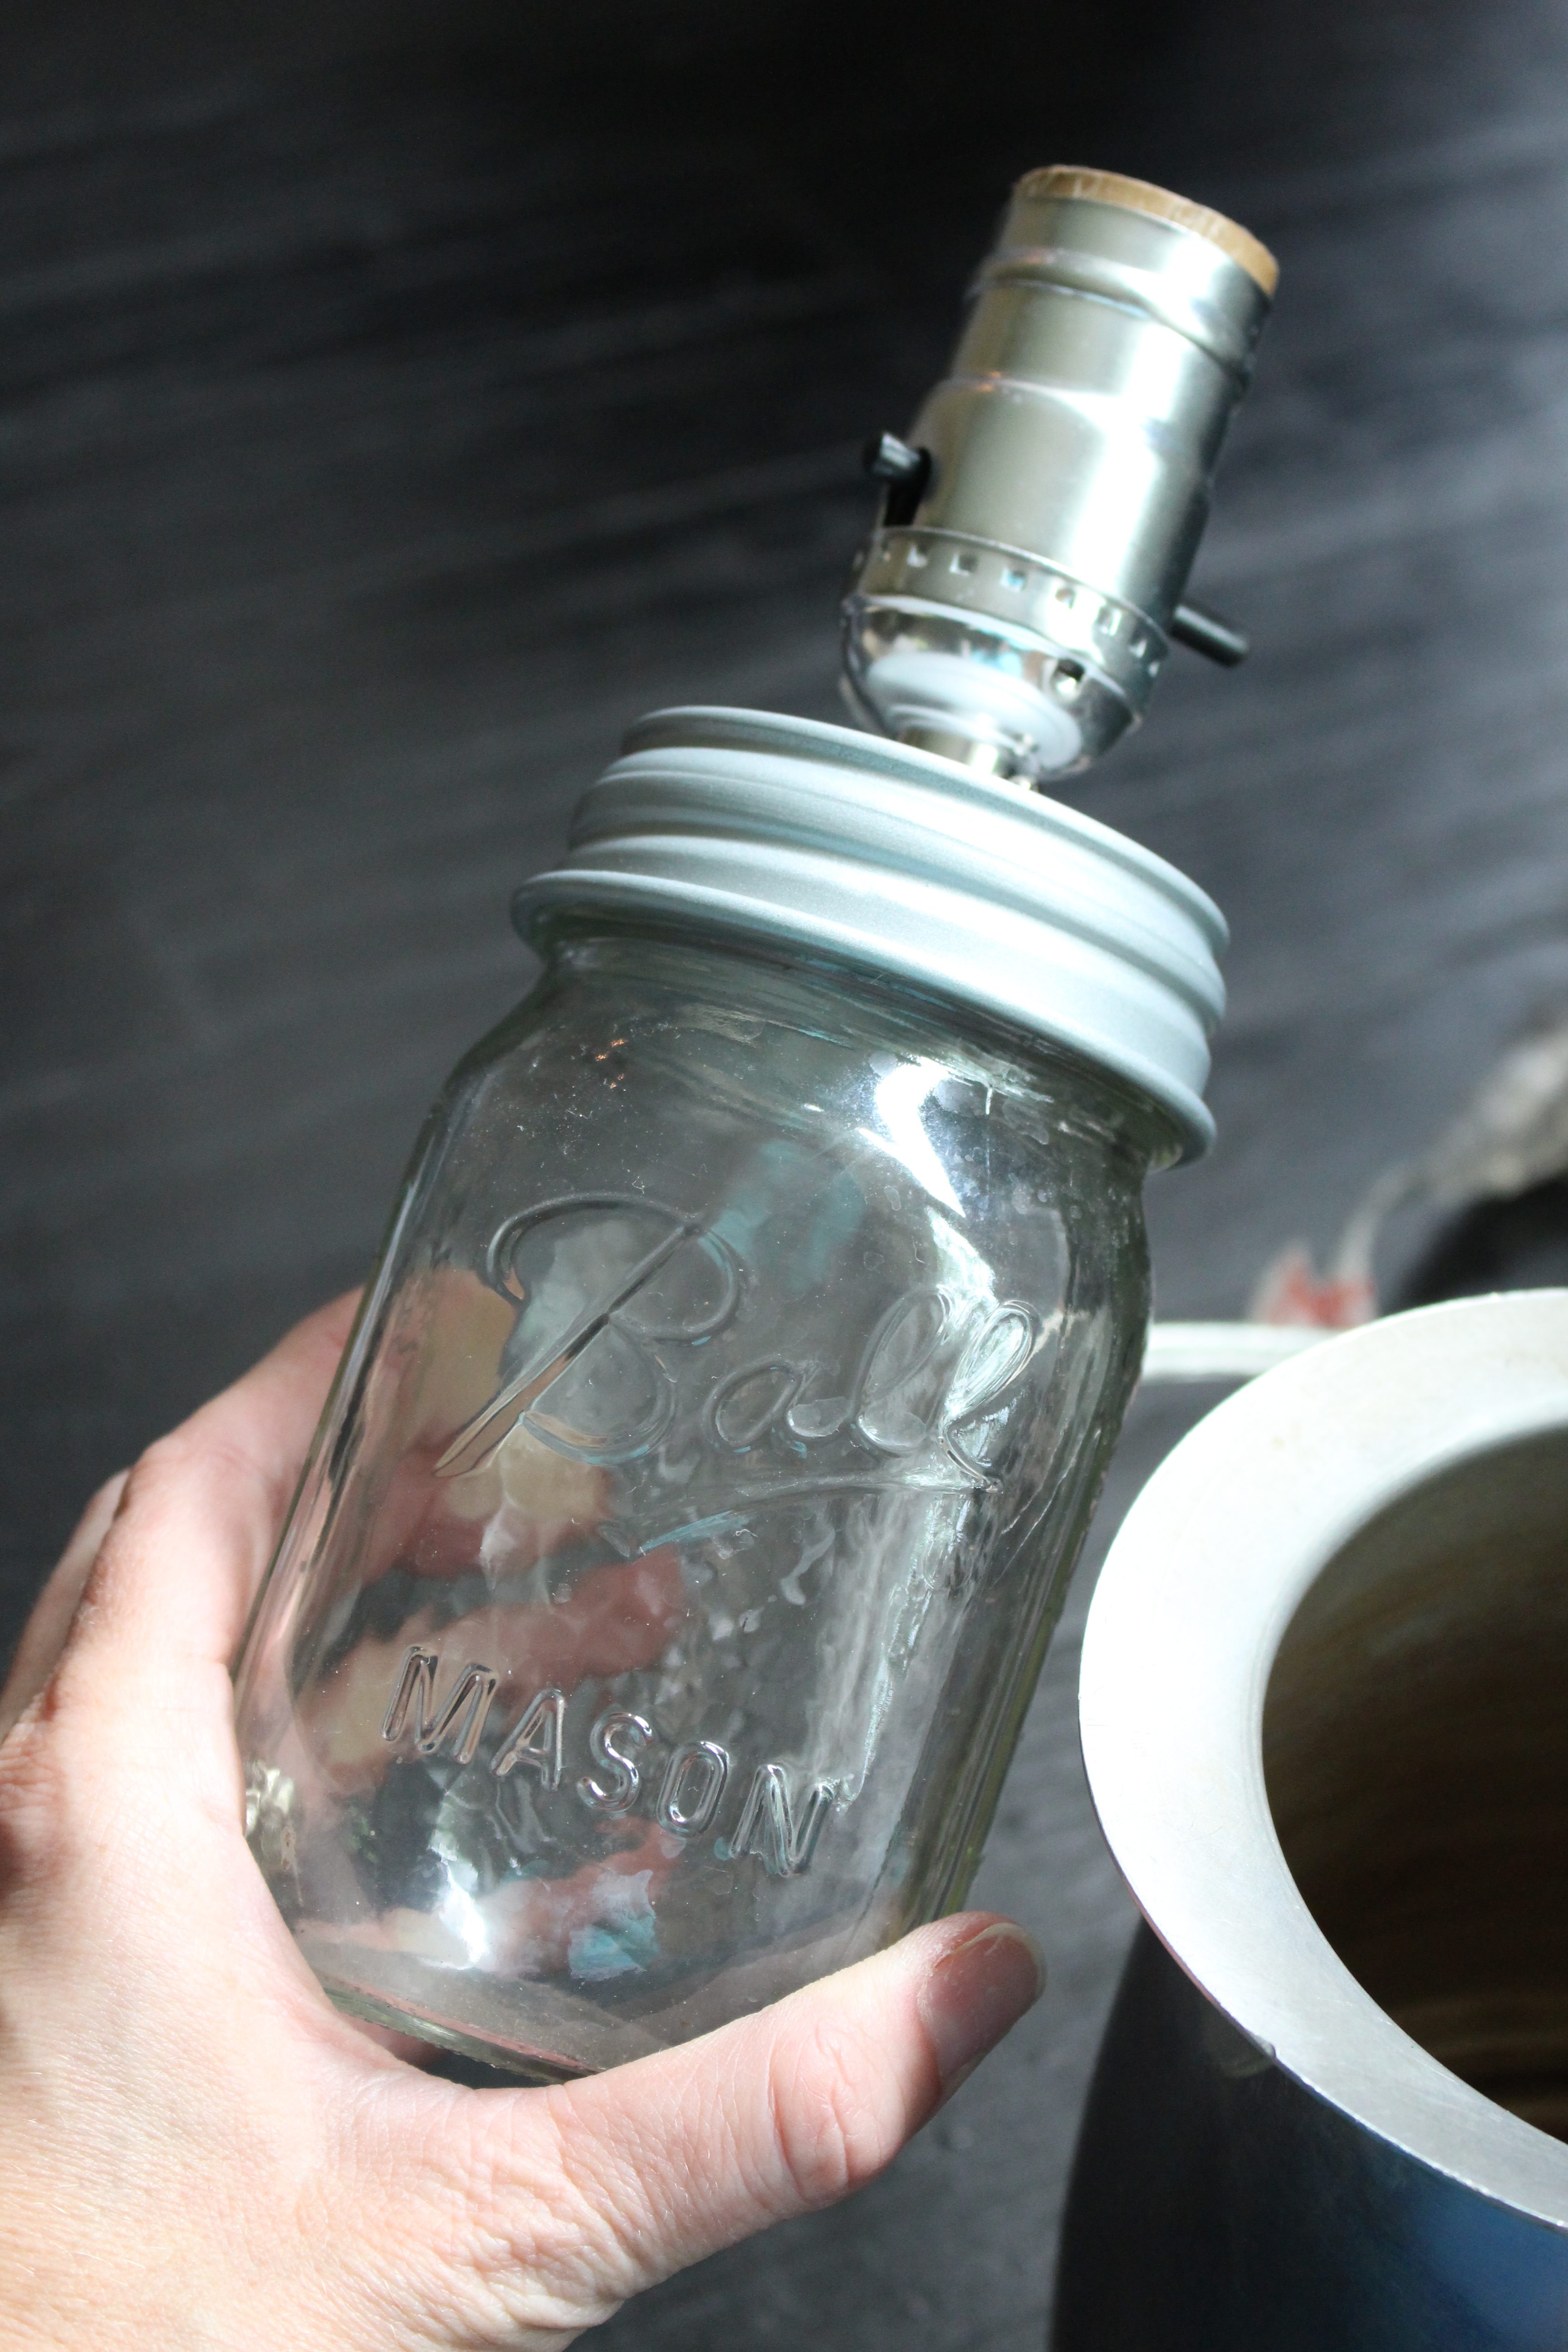 DIY Coffee Pot Lamp for the Monthly Create and Share Challenge by www.whitecottagehomeandliving.com